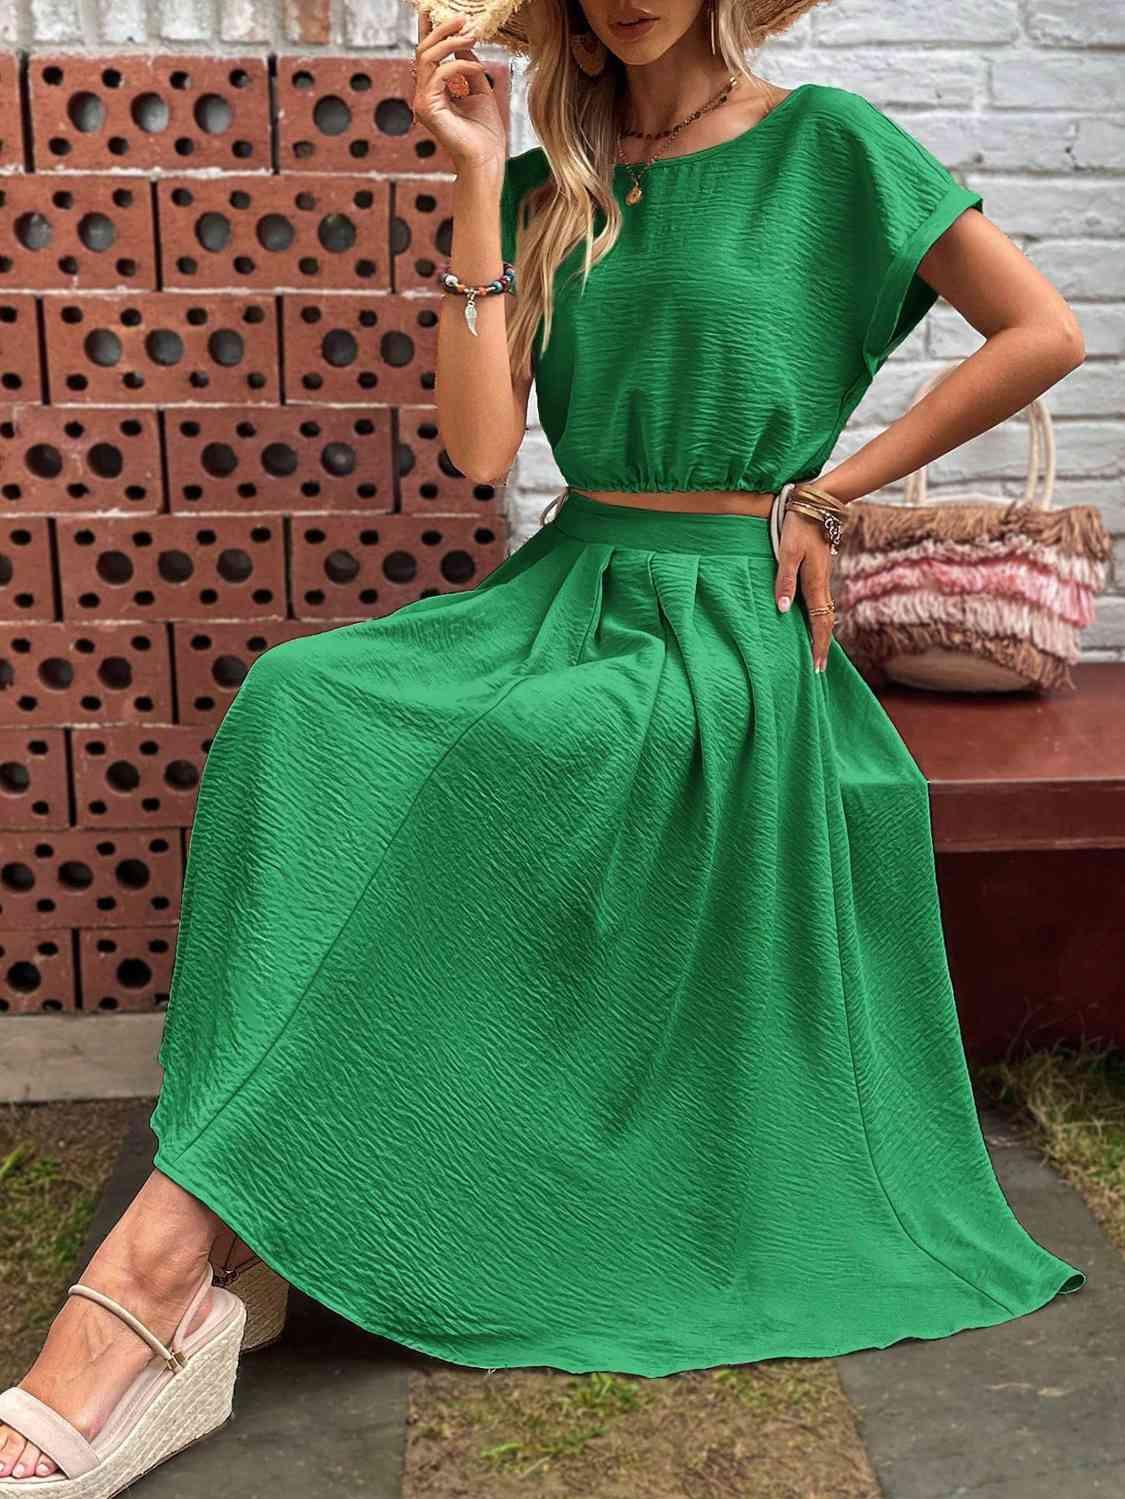 a woman sitting on a bench wearing a green dress